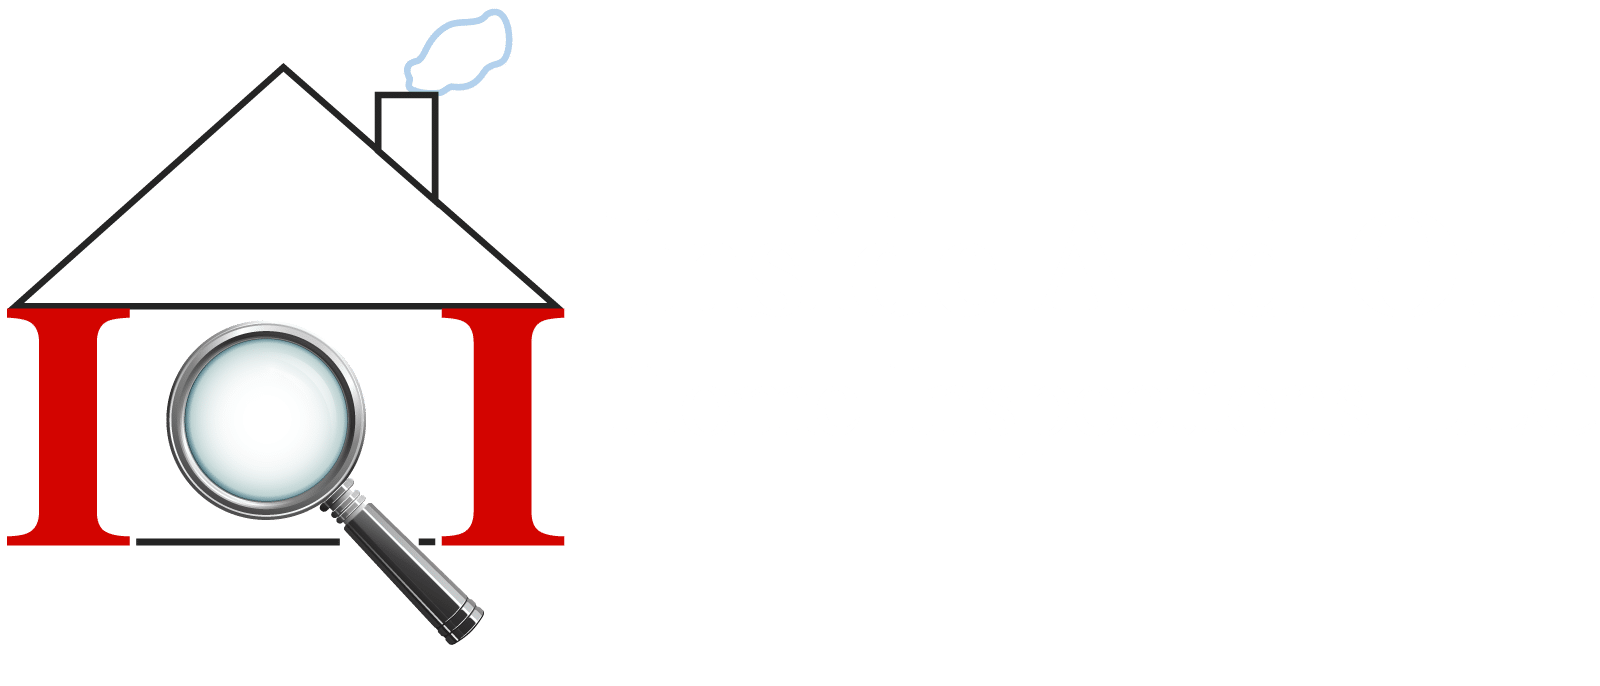 Inside and Out Home Inspections